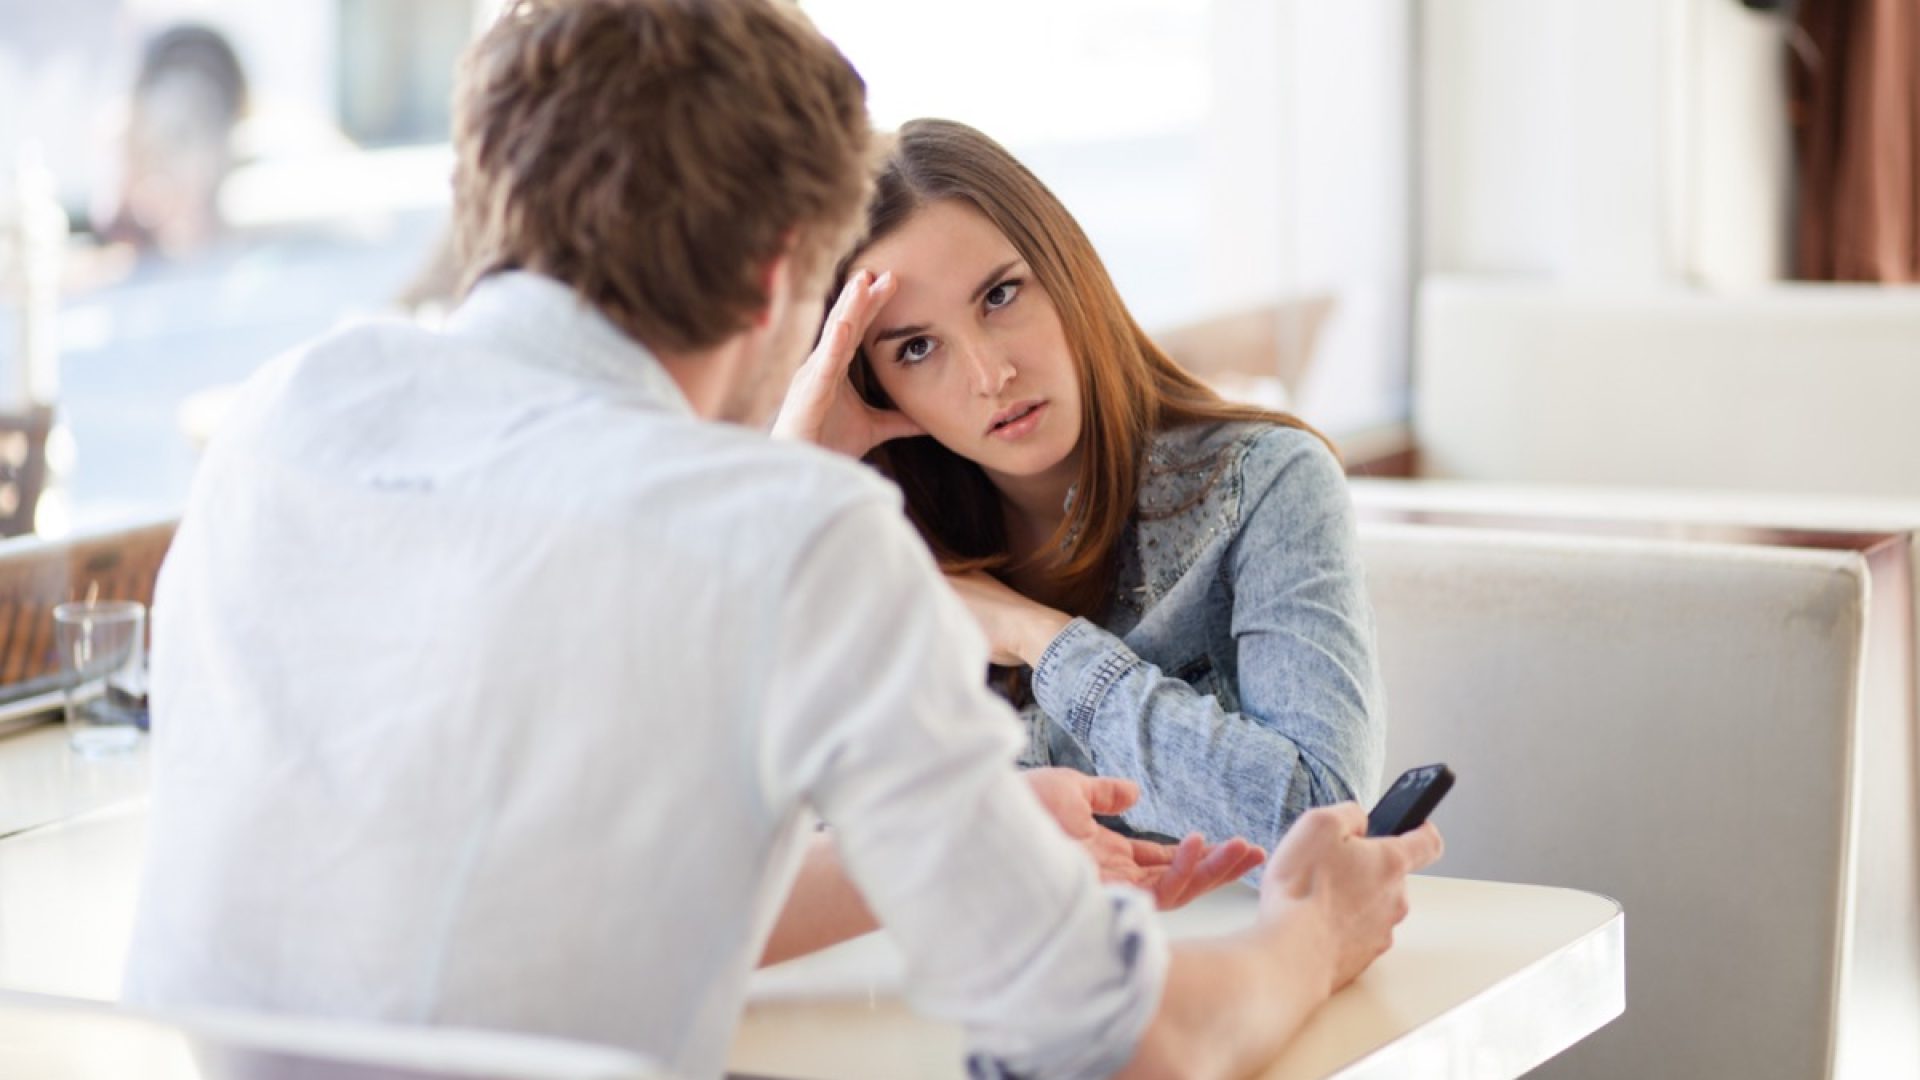 Half Of Men Say They Would Break Up With A Woman Who Never Pays